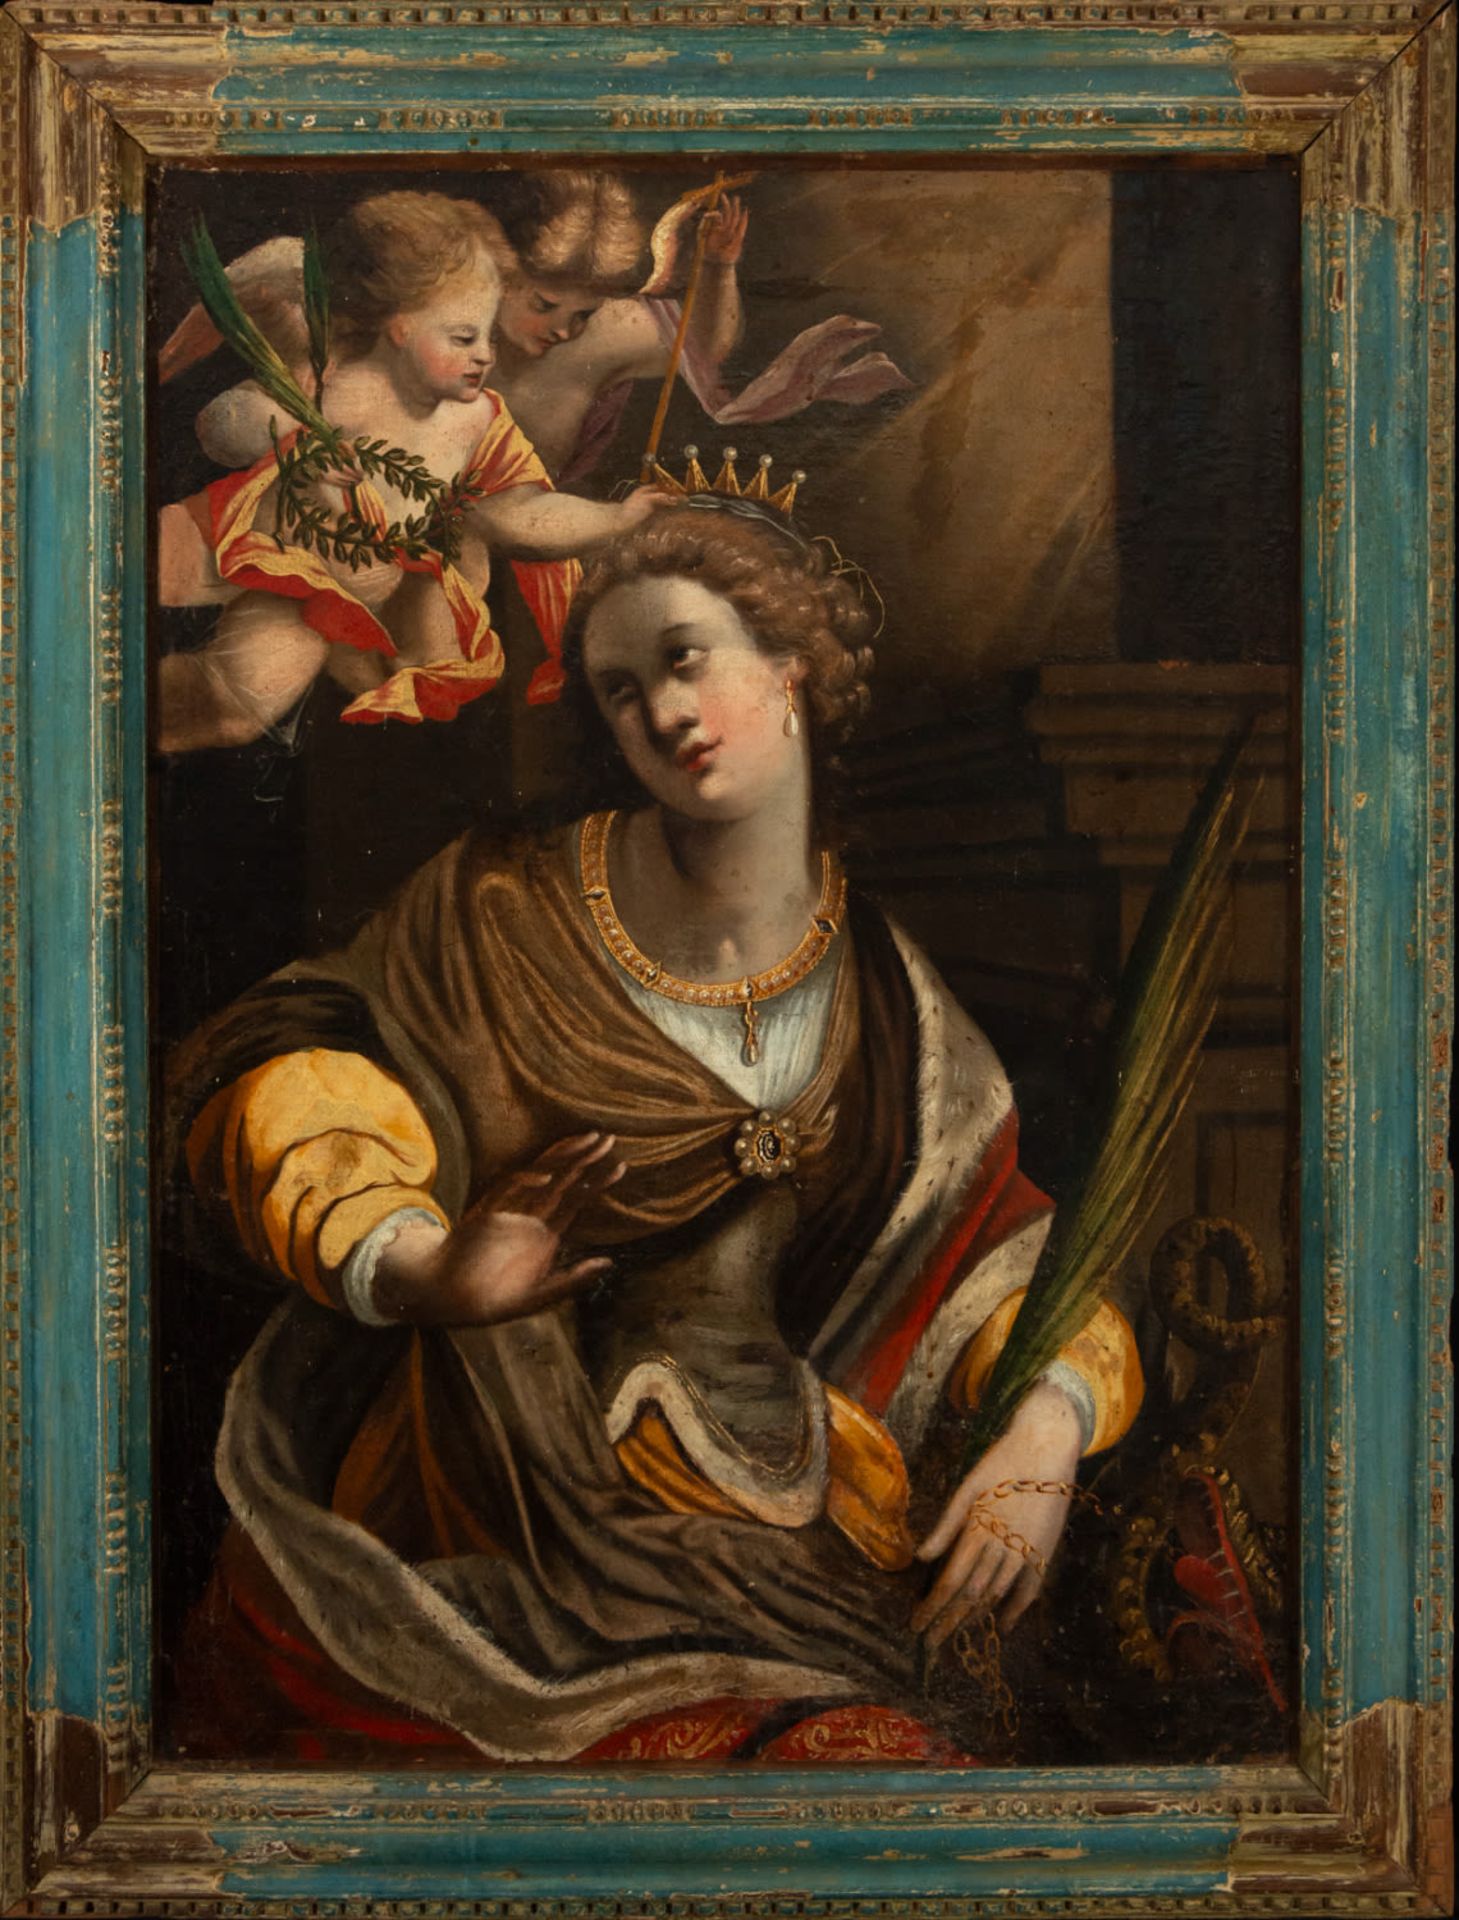 The coronation of Saint Catherine, Italo Flemish school of the 17th century, signed and dated 1614